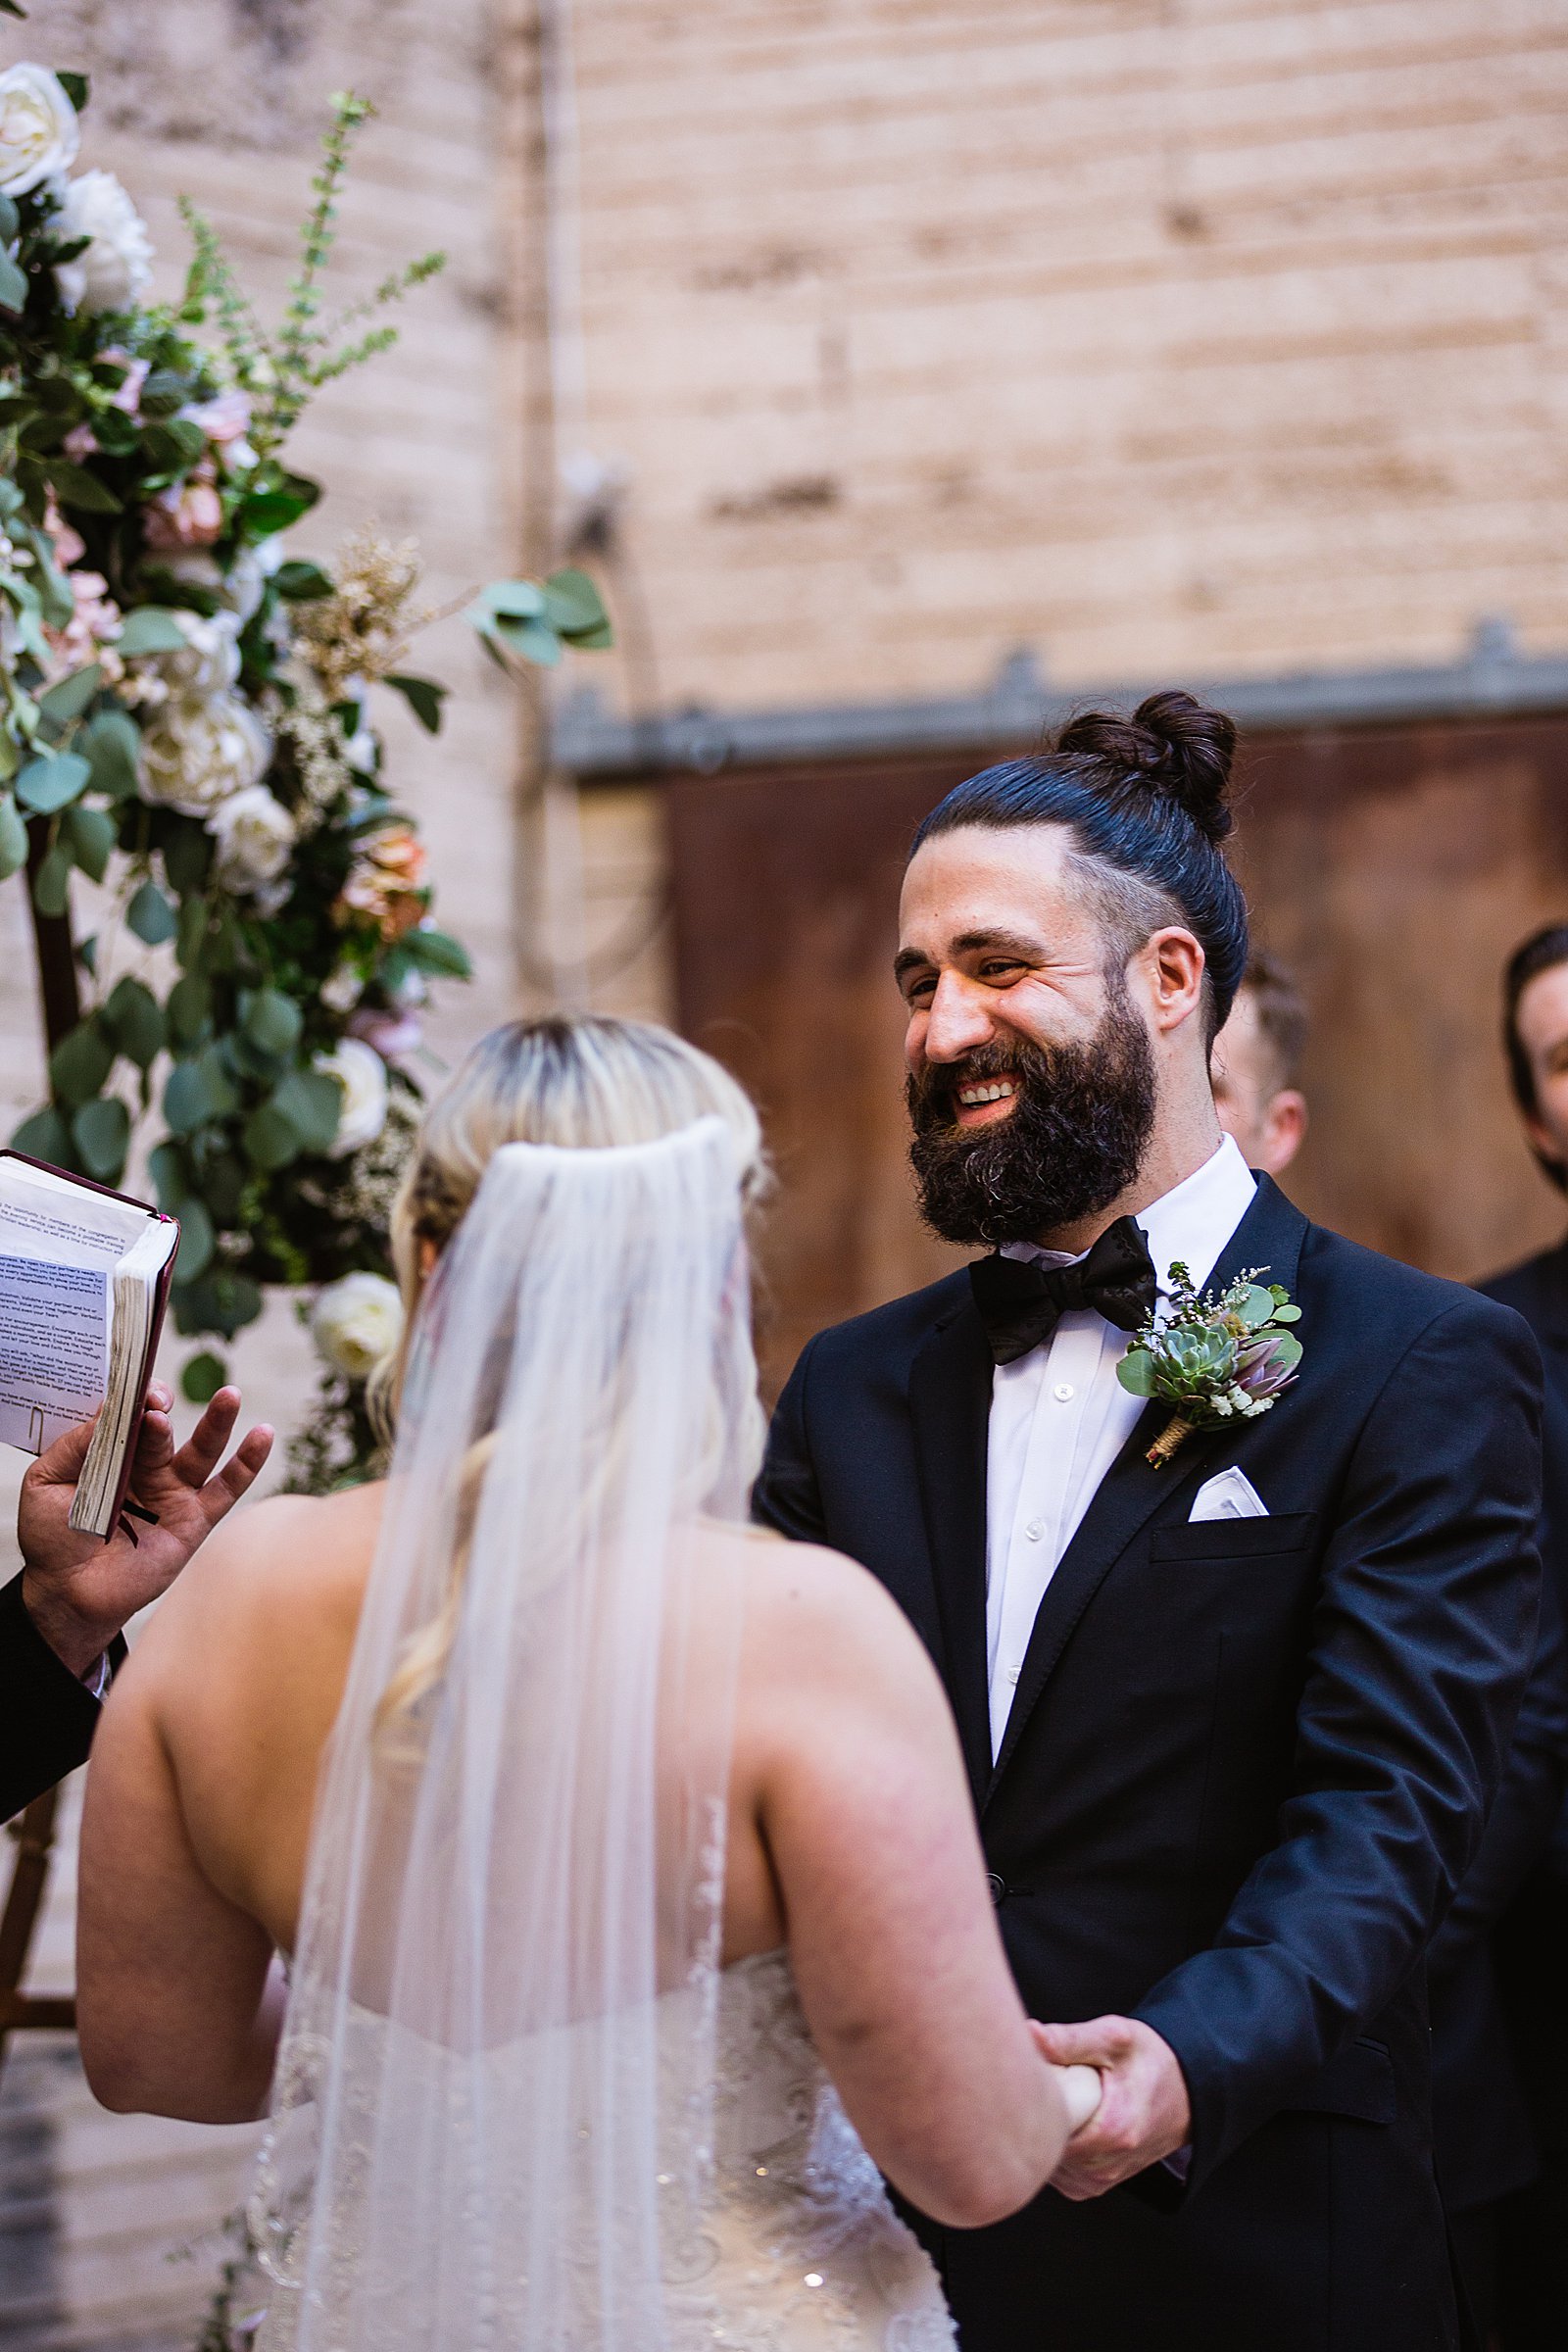 Groom looking at his bride during their wedding ceremony at The Ice House by Phoenix wedding photographer PMA Photography.